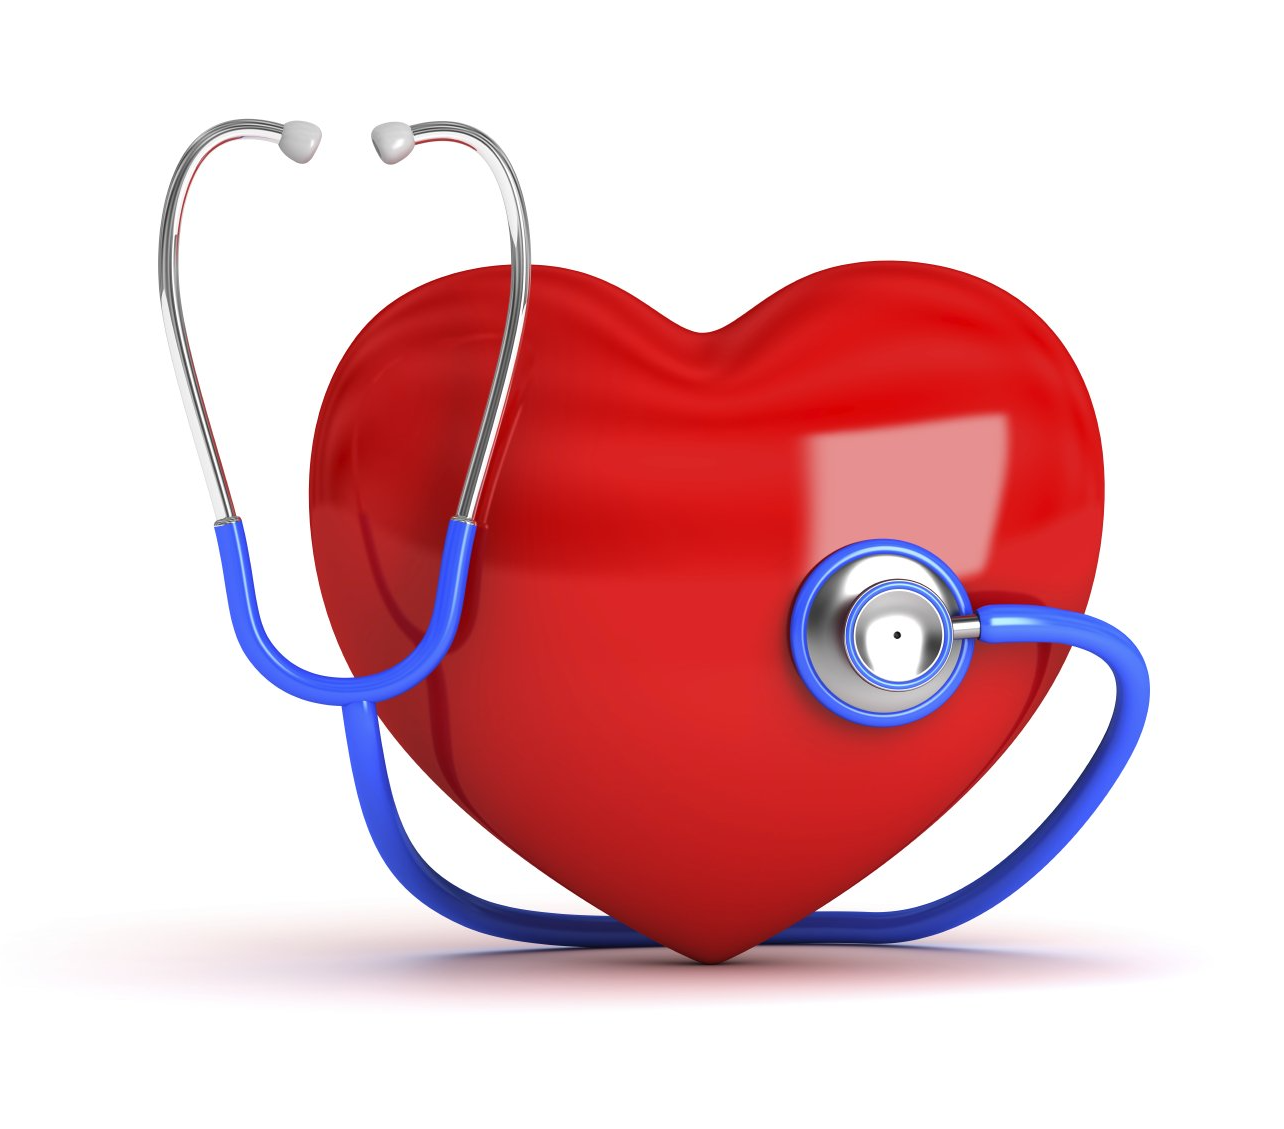 Graphic representing Life and Health insurance. Heart shape with stethoscope